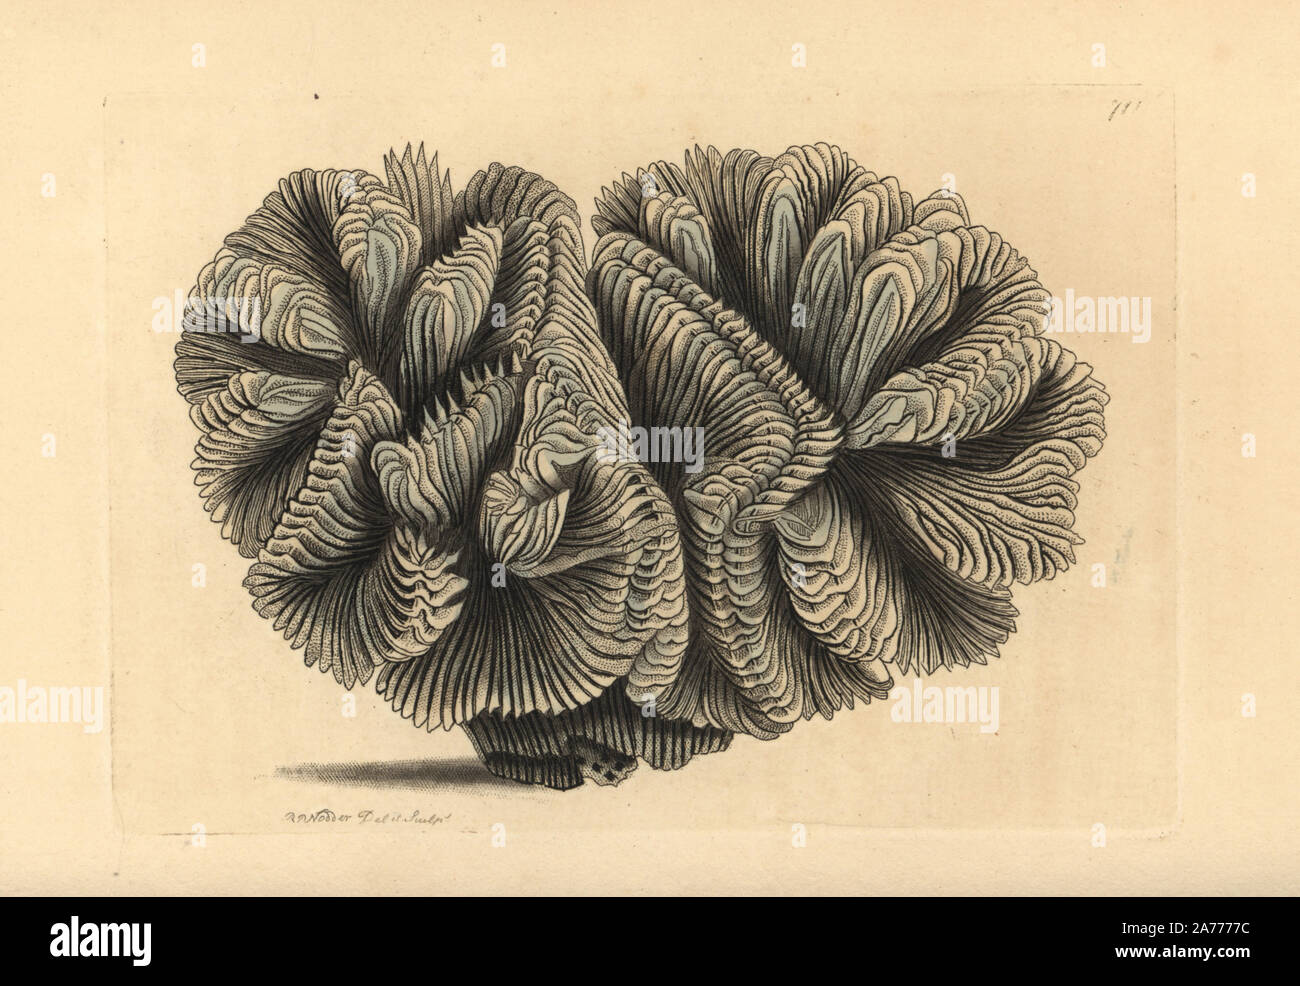 Curled madrepore or crested Indian coral, Madrepora cincinnata. Illustration drawn and engraved by Richard Polydore Nodder. Handcoloured copperplate engraving from George Shaw and Frederick Nodder's 'The Naturalist's Miscellany,' London, 1805. Stock Photo